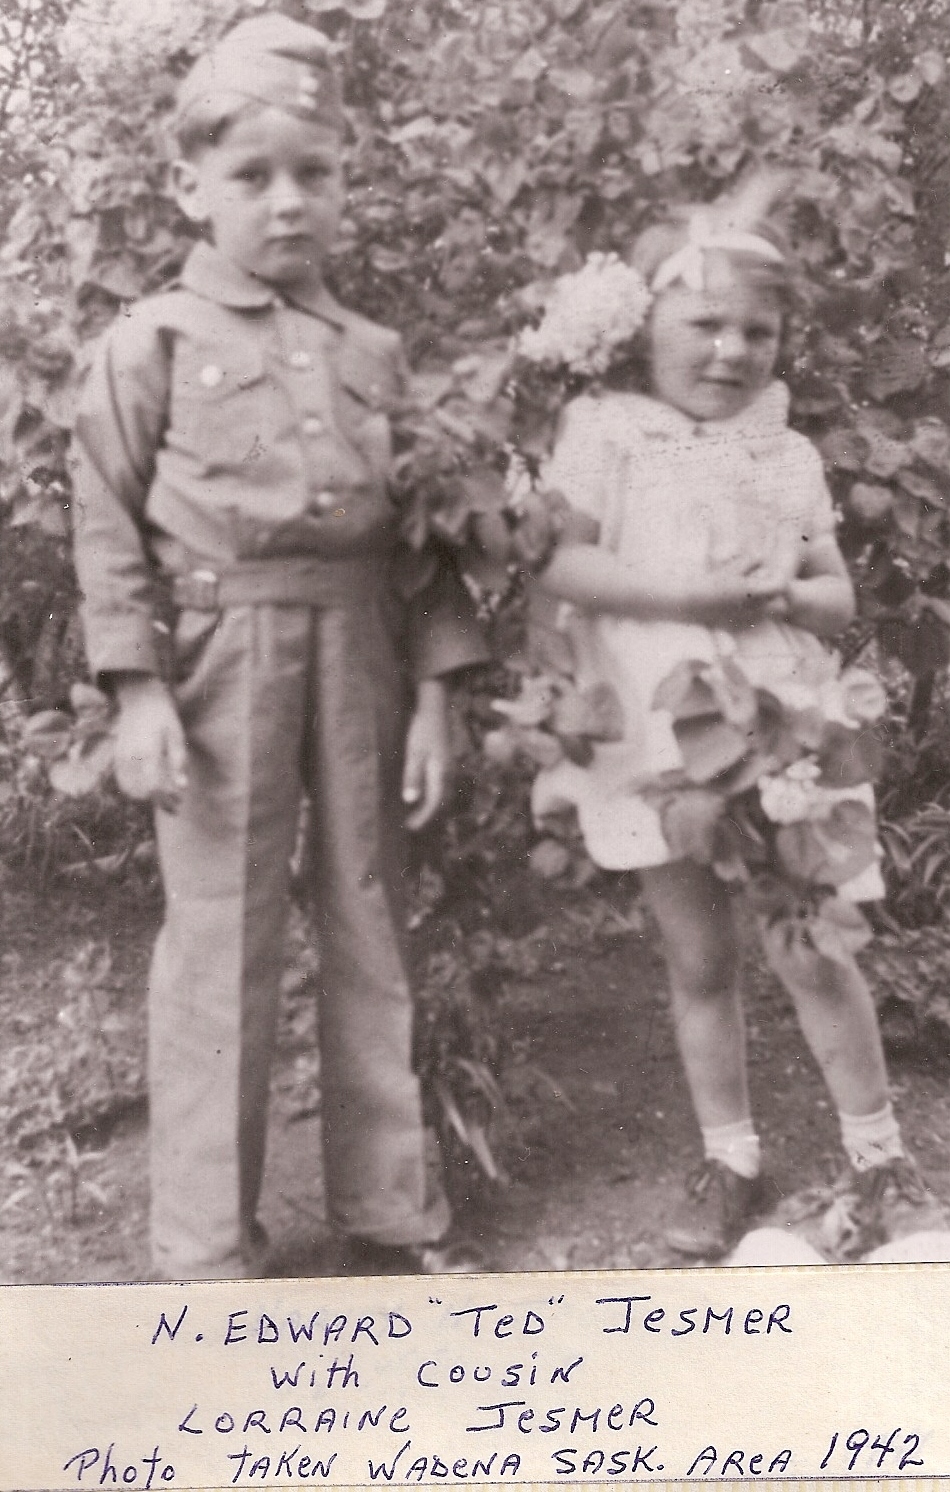 Ted and cousin in 1942 at 6 yrs old